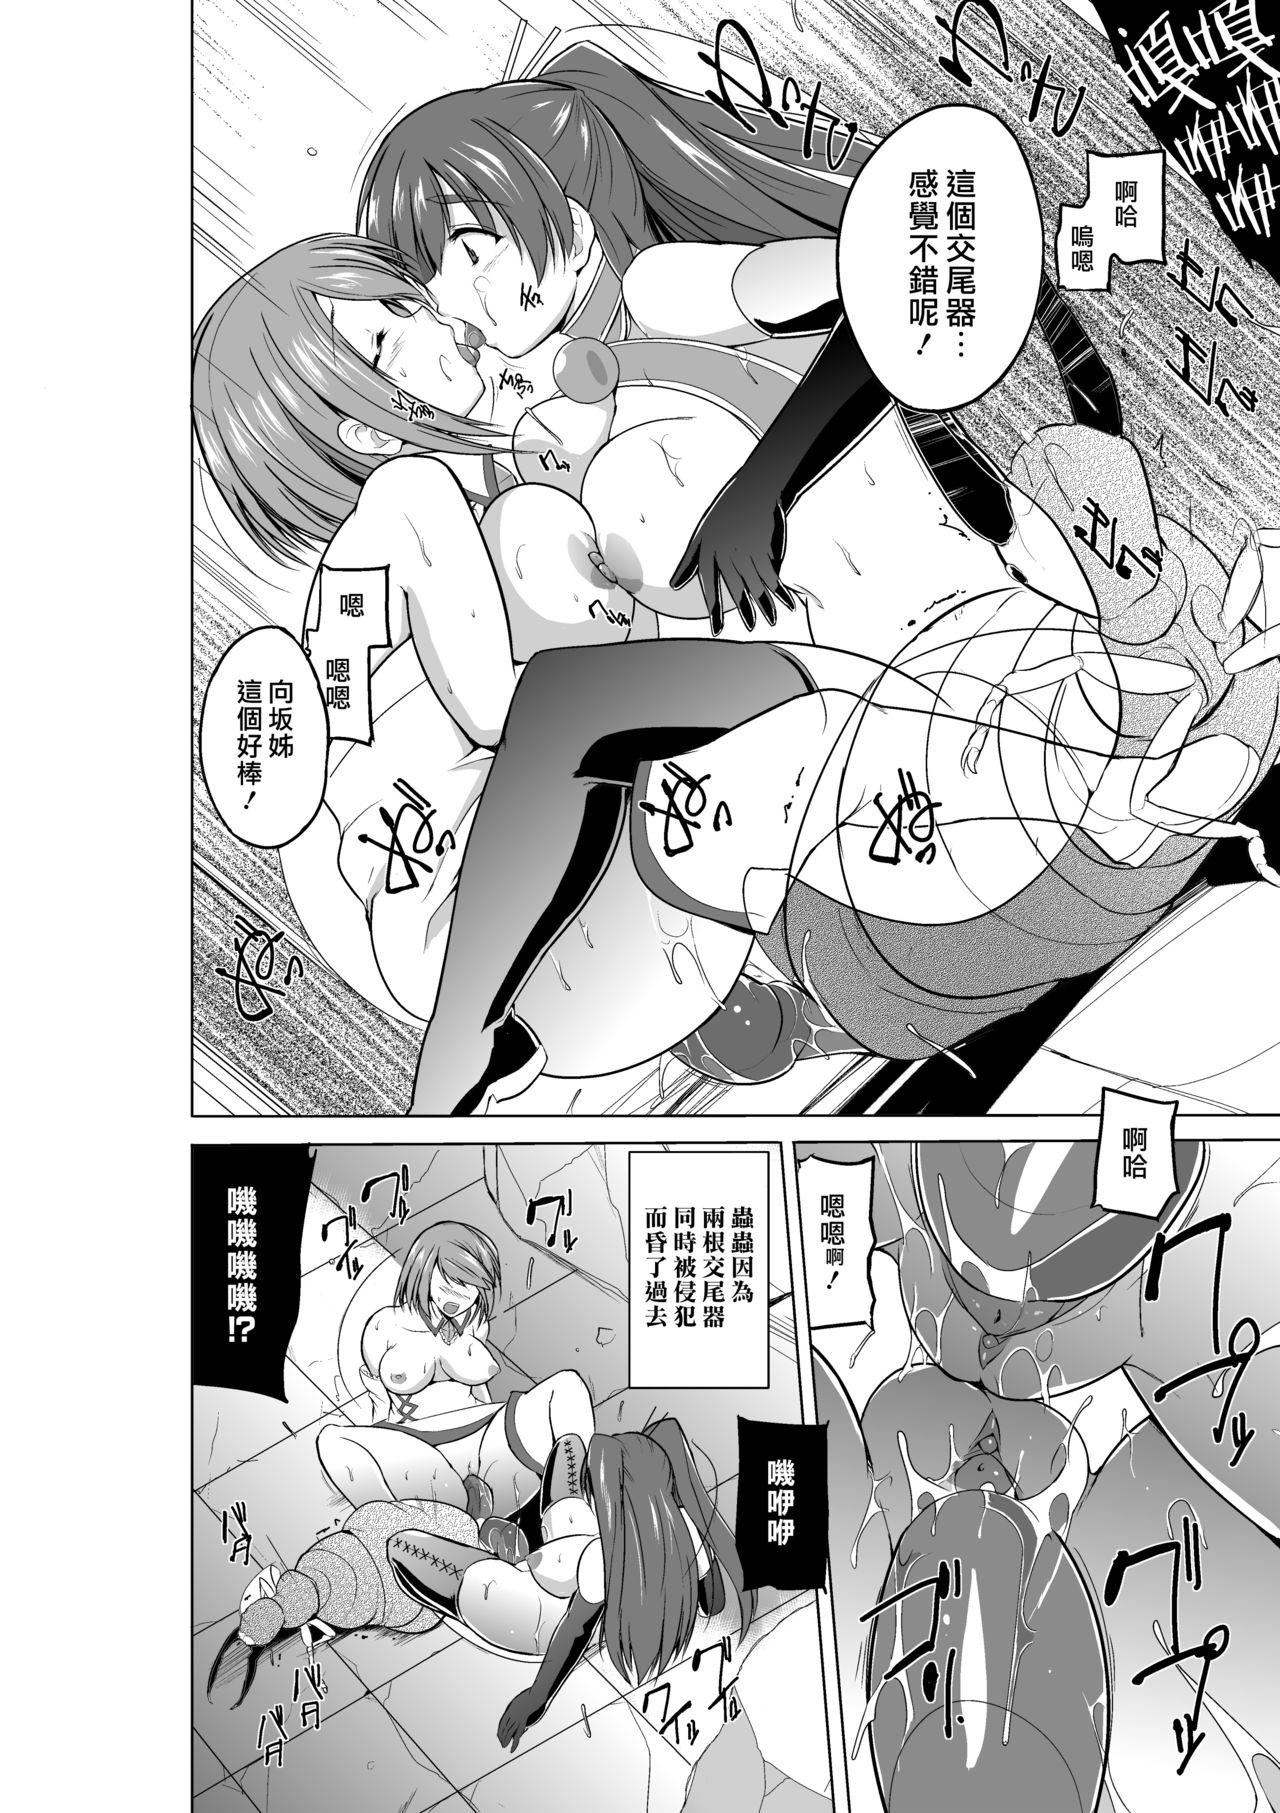 Teamskeet Dungeon Travelers Minna no Oyuugi - Toheart2 Young Men - Page 8